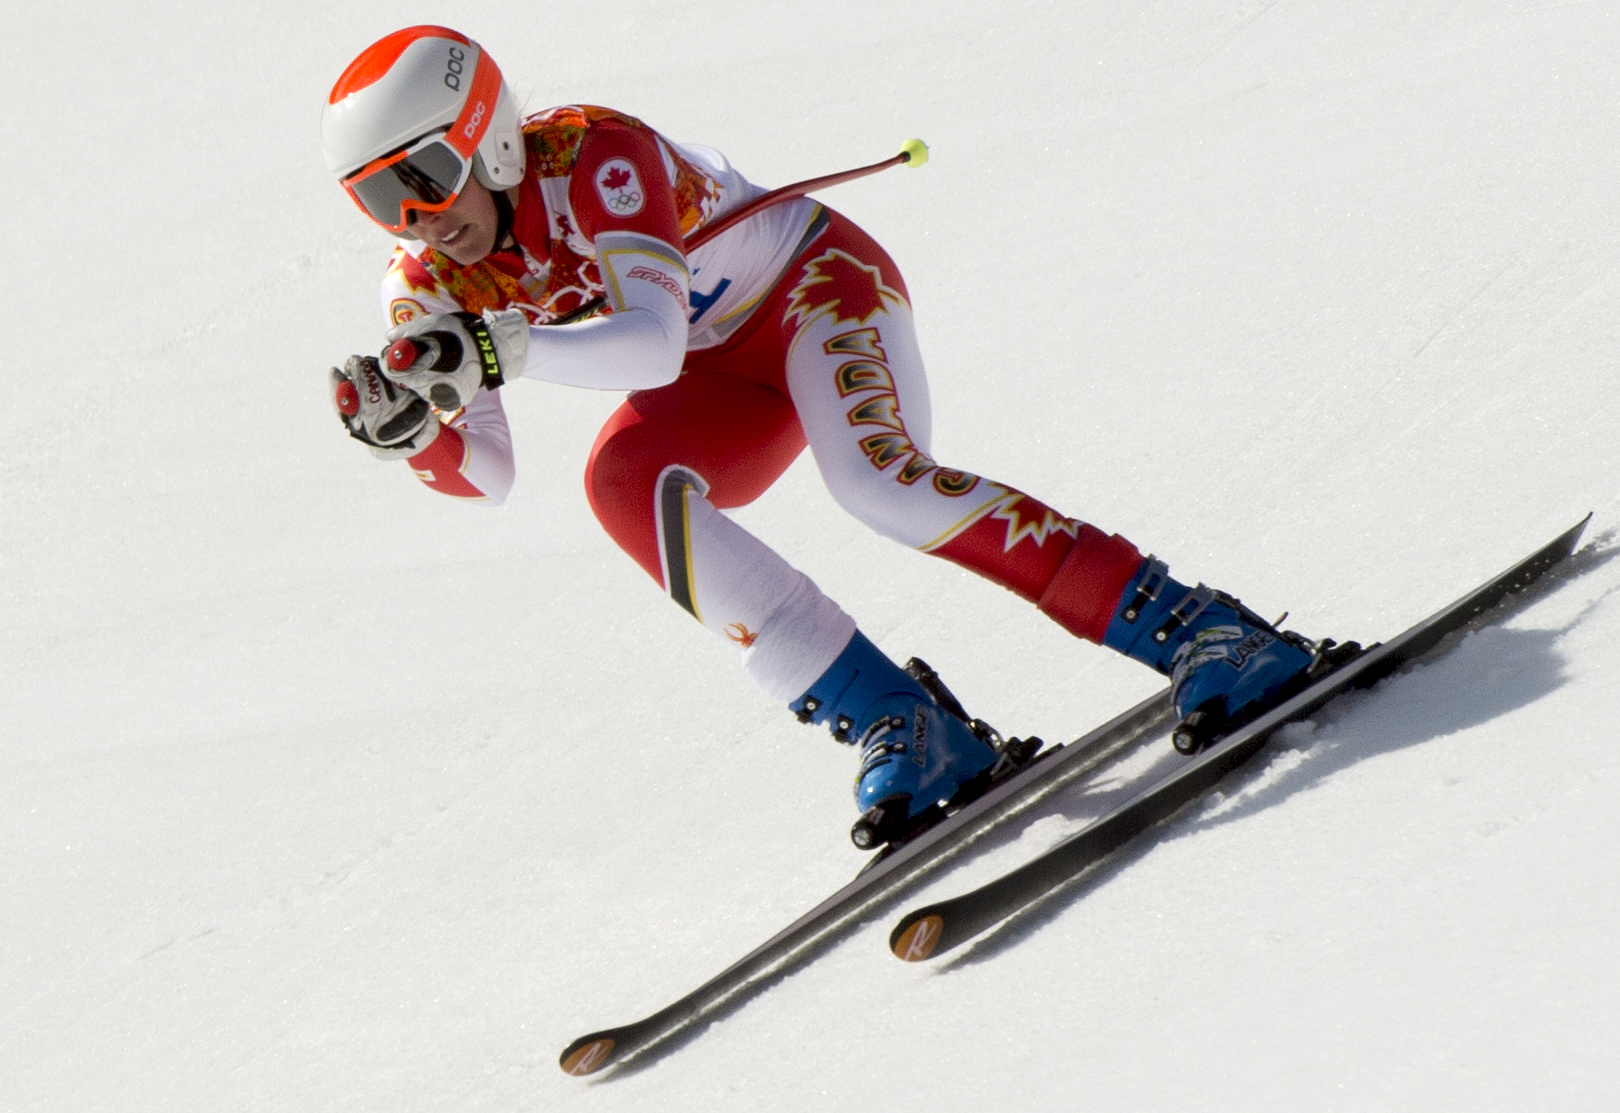 Marie-Michele Gagnon competing in the women's downhill at Sochi 2014 (Photo: CP)